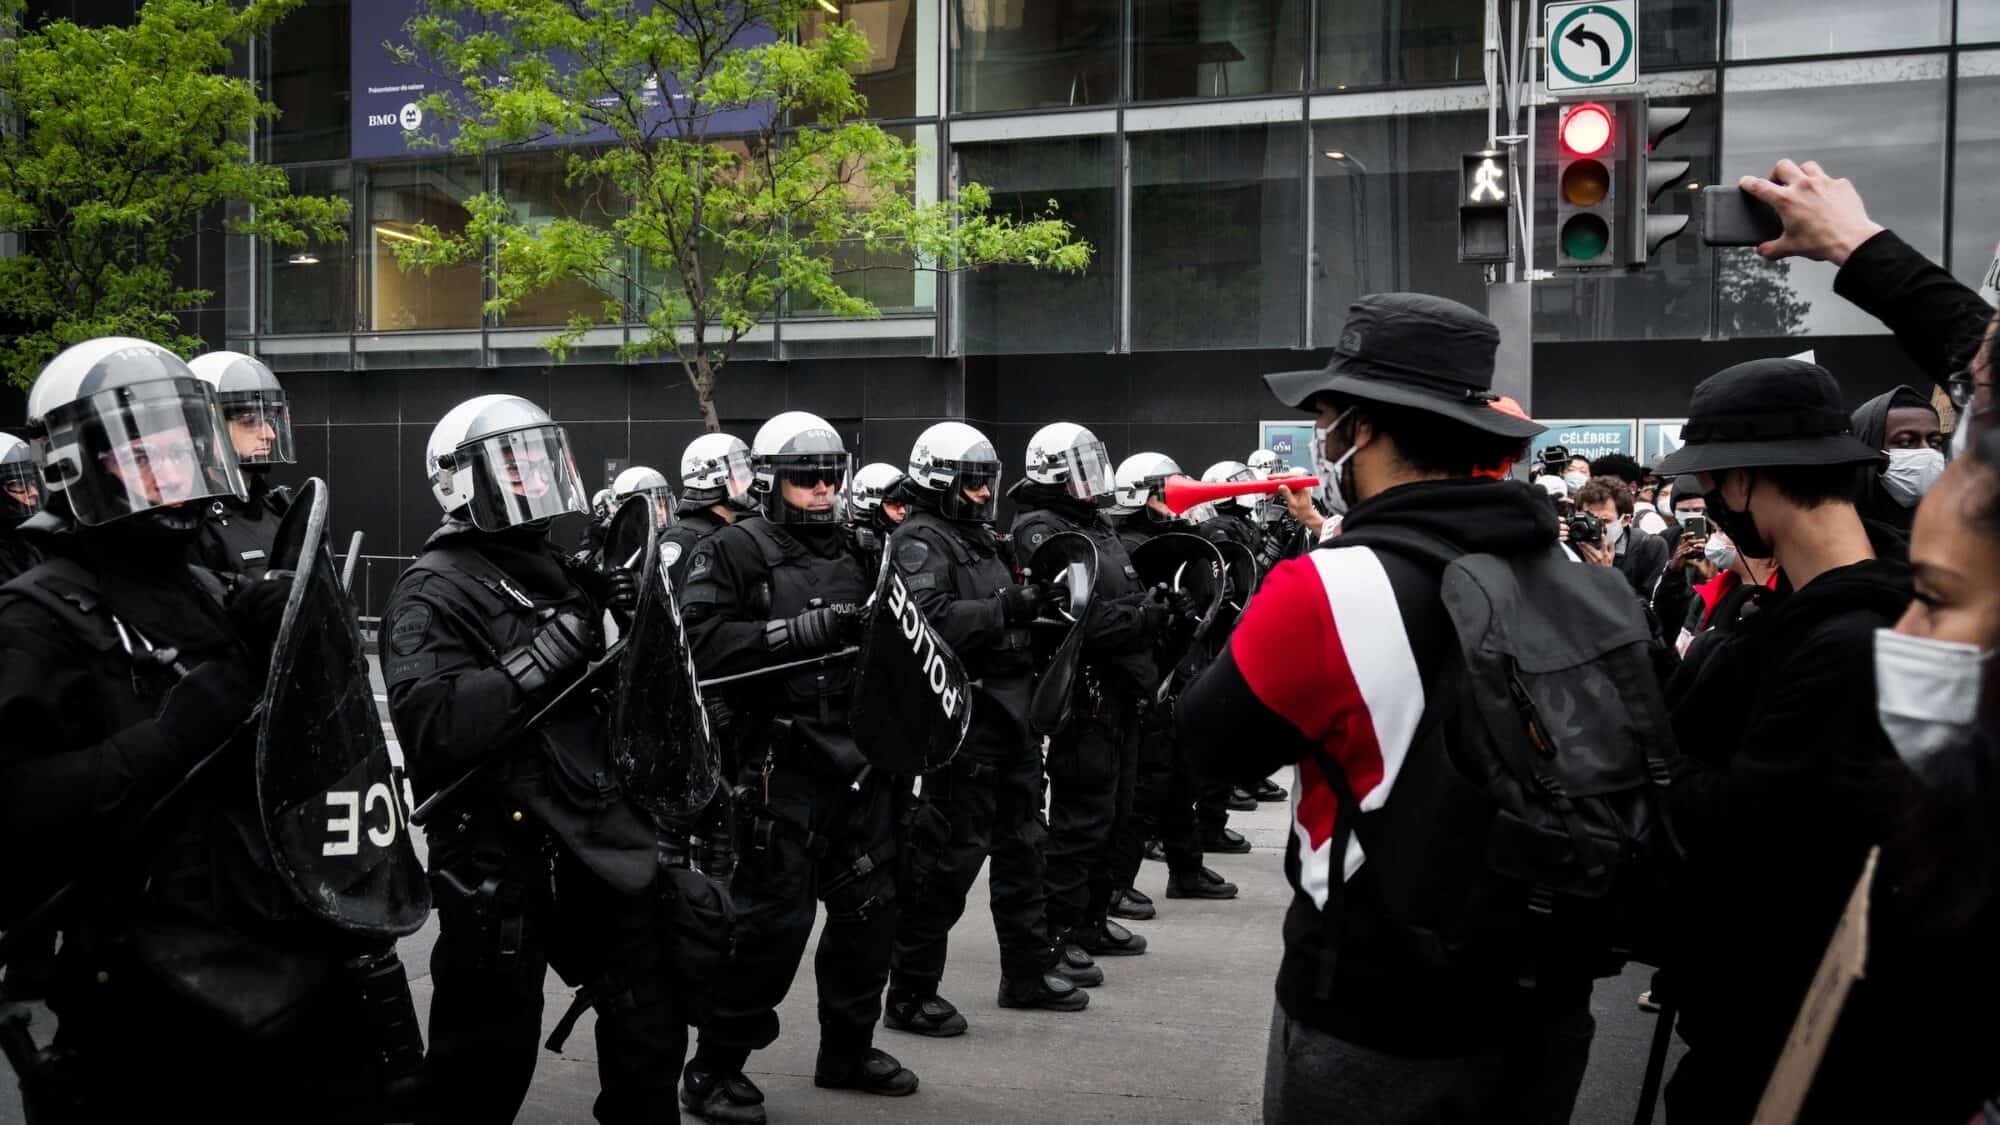 A line of police dressed in riot gear confront protestors on a city street.